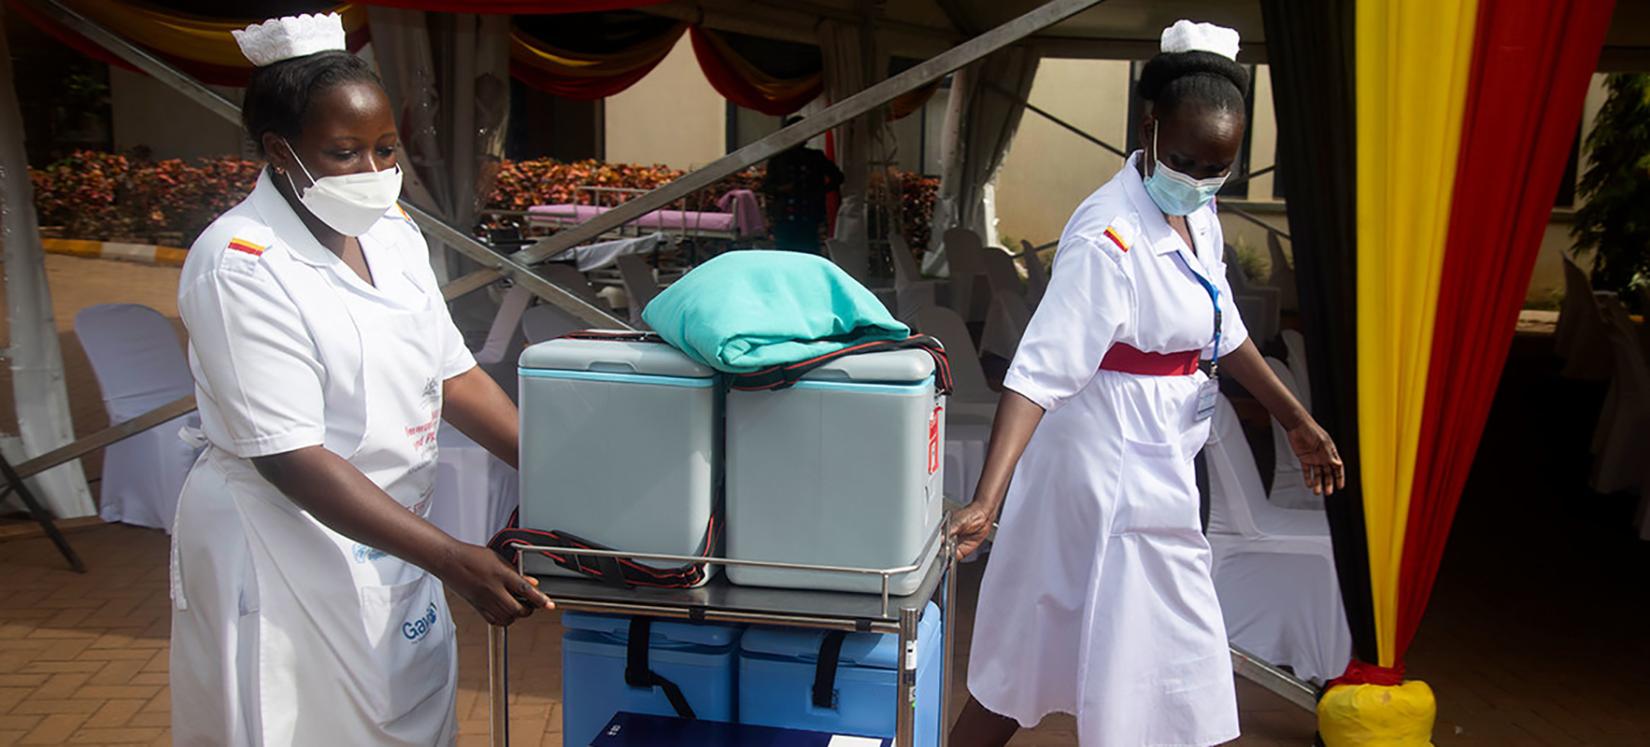 Two health workers carrying a trolley of vaccines.